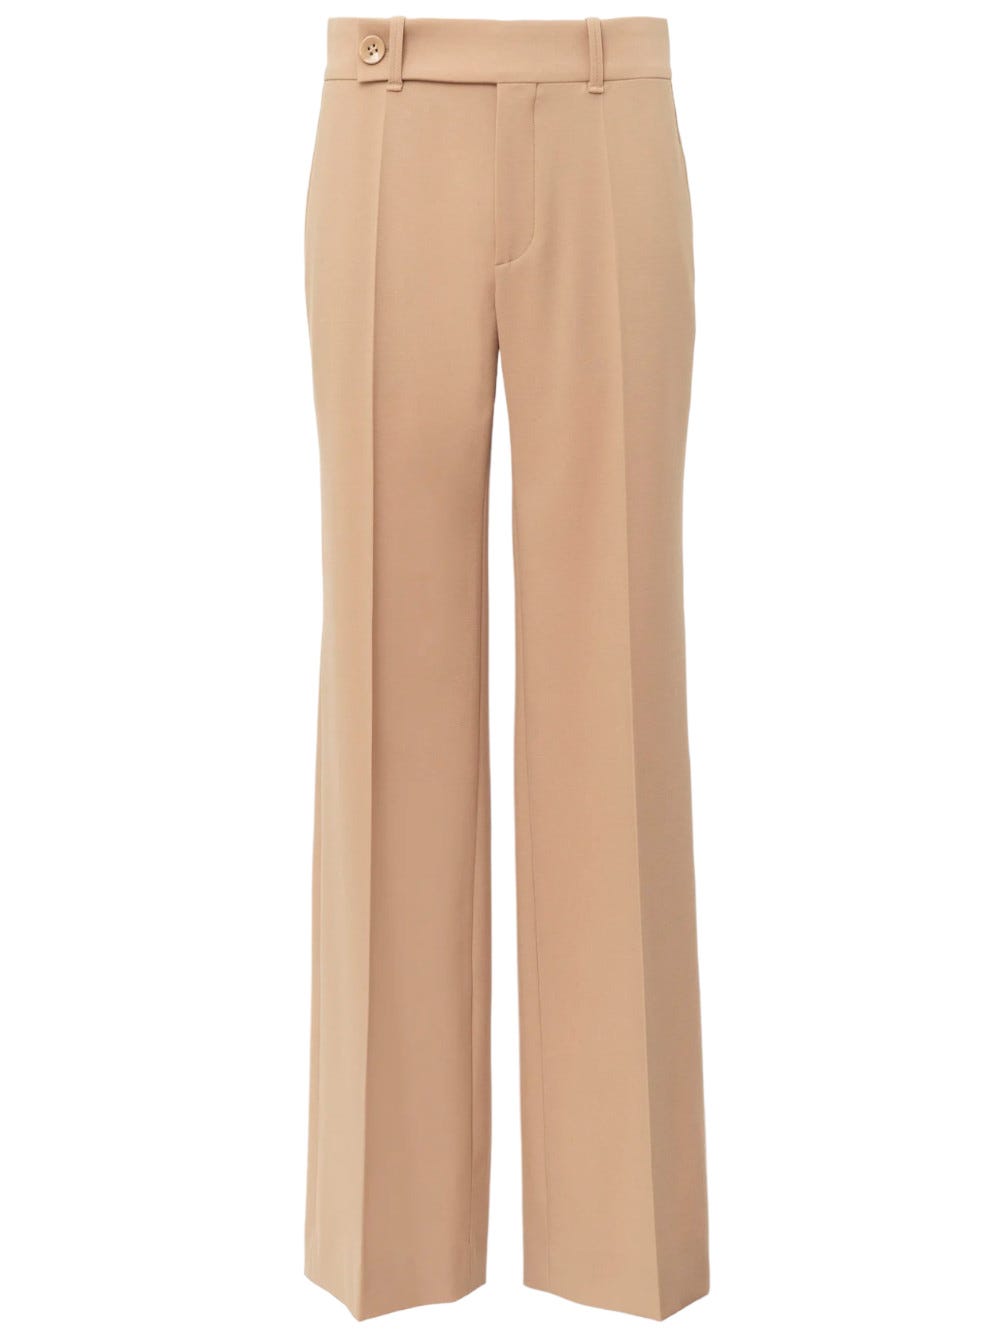 CHLOÉ BEIGE STRAIGHT TAILORED PANTS